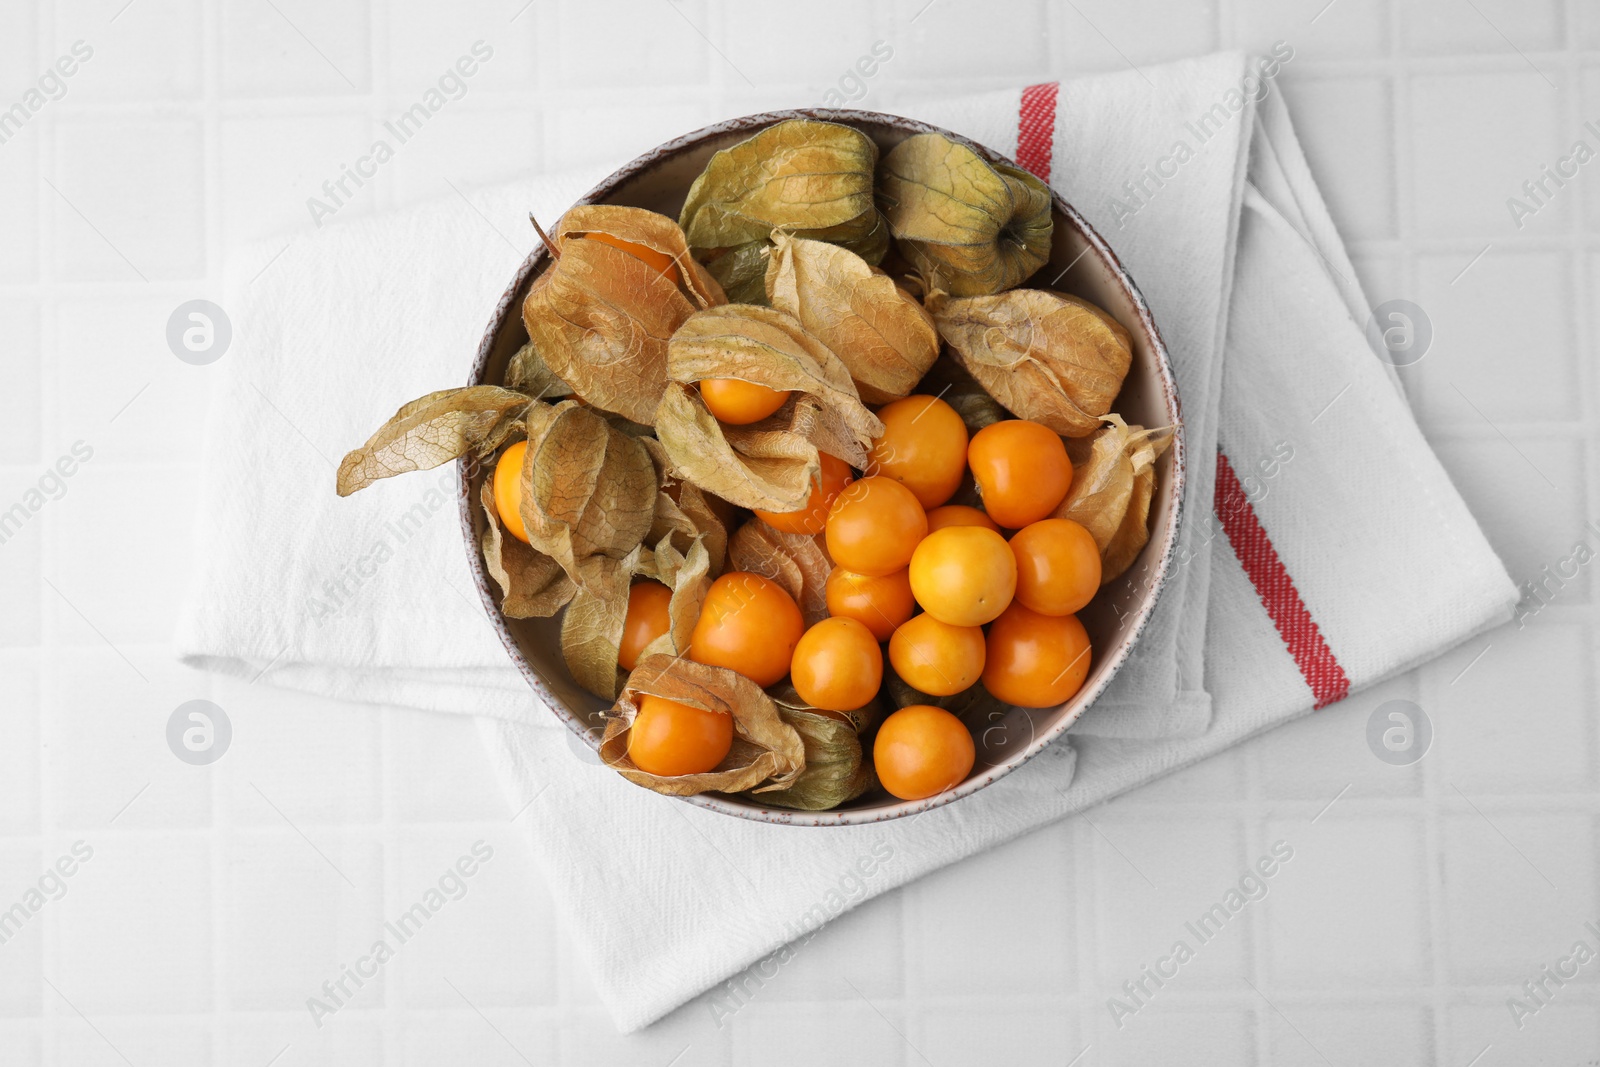 Photo of Ripe physalis fruits with calyxes in bowl on white tiled table, top view